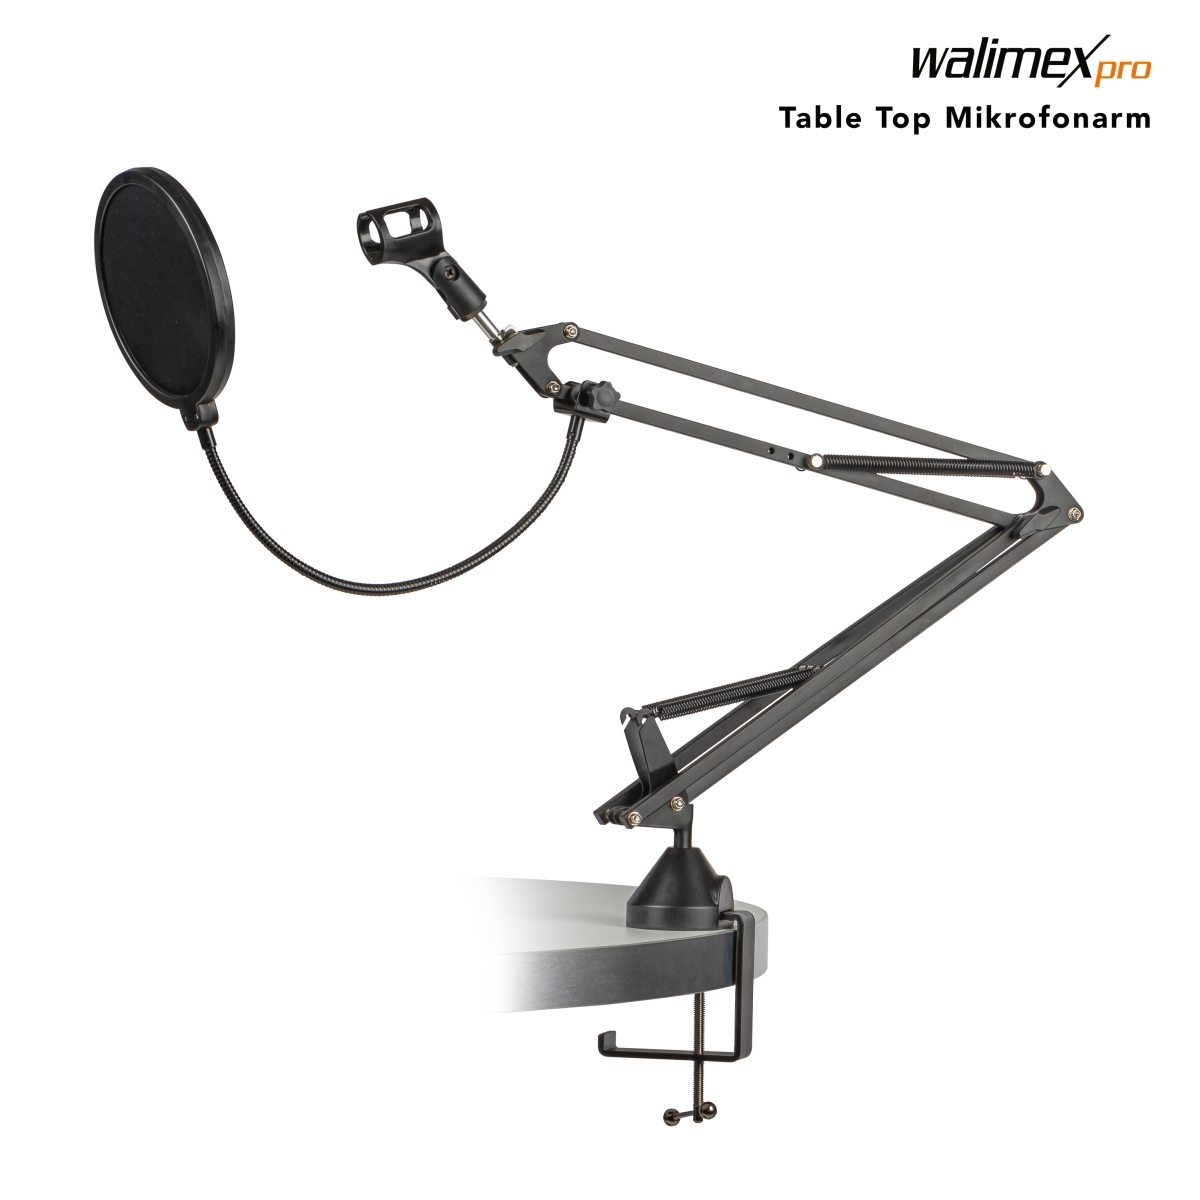 Walimex pro Table Top Microphone arm